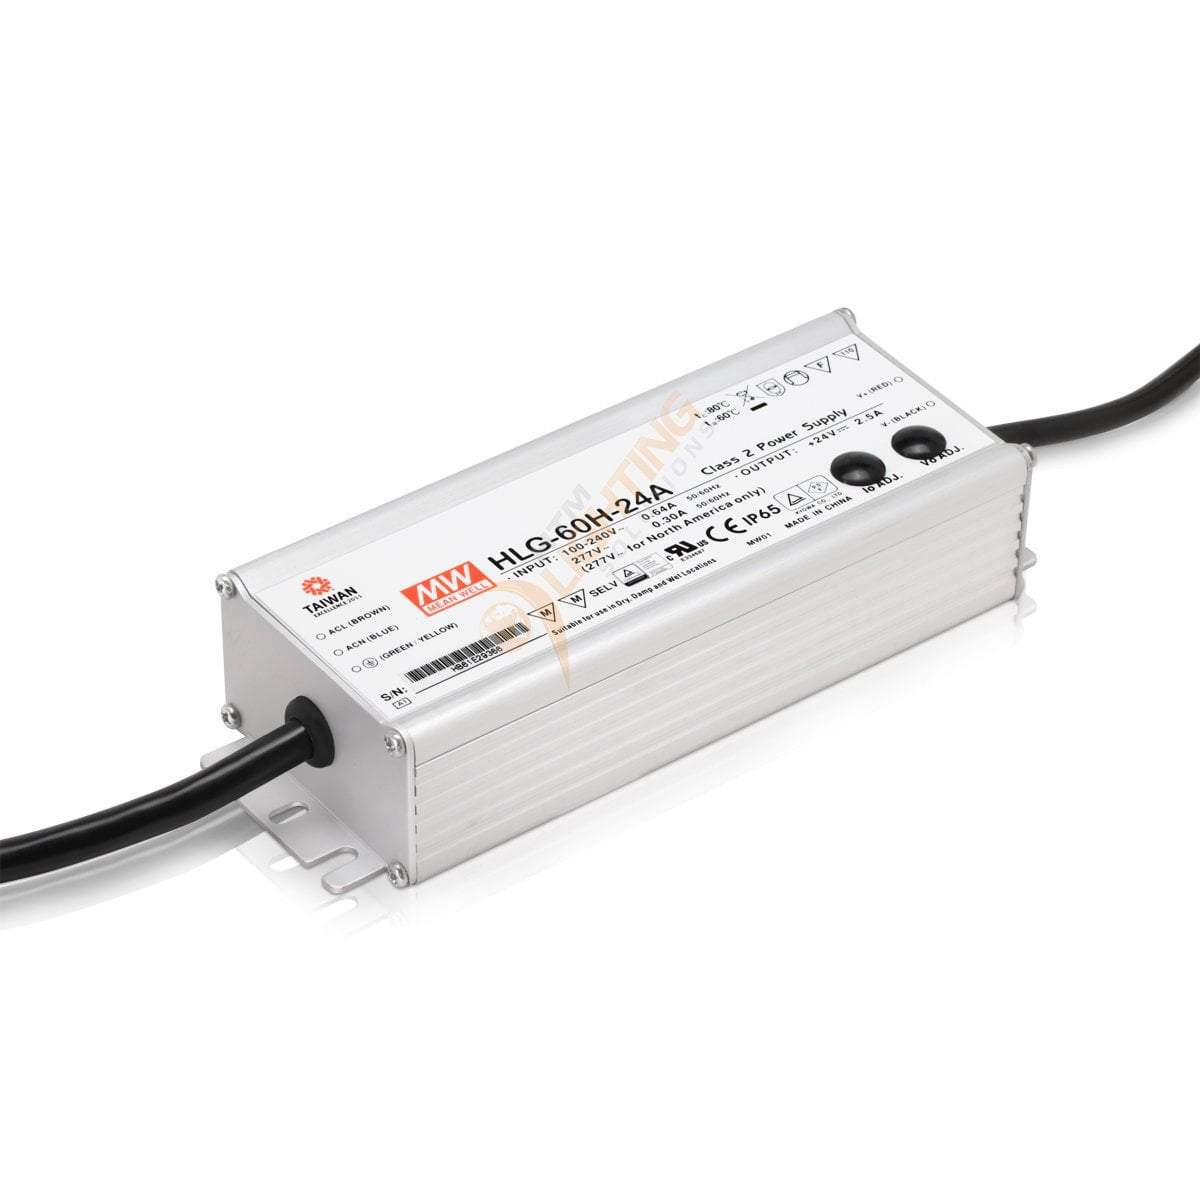 Mean Well LED Driver - 24V DC A Type Dimming Function - HLG-60H